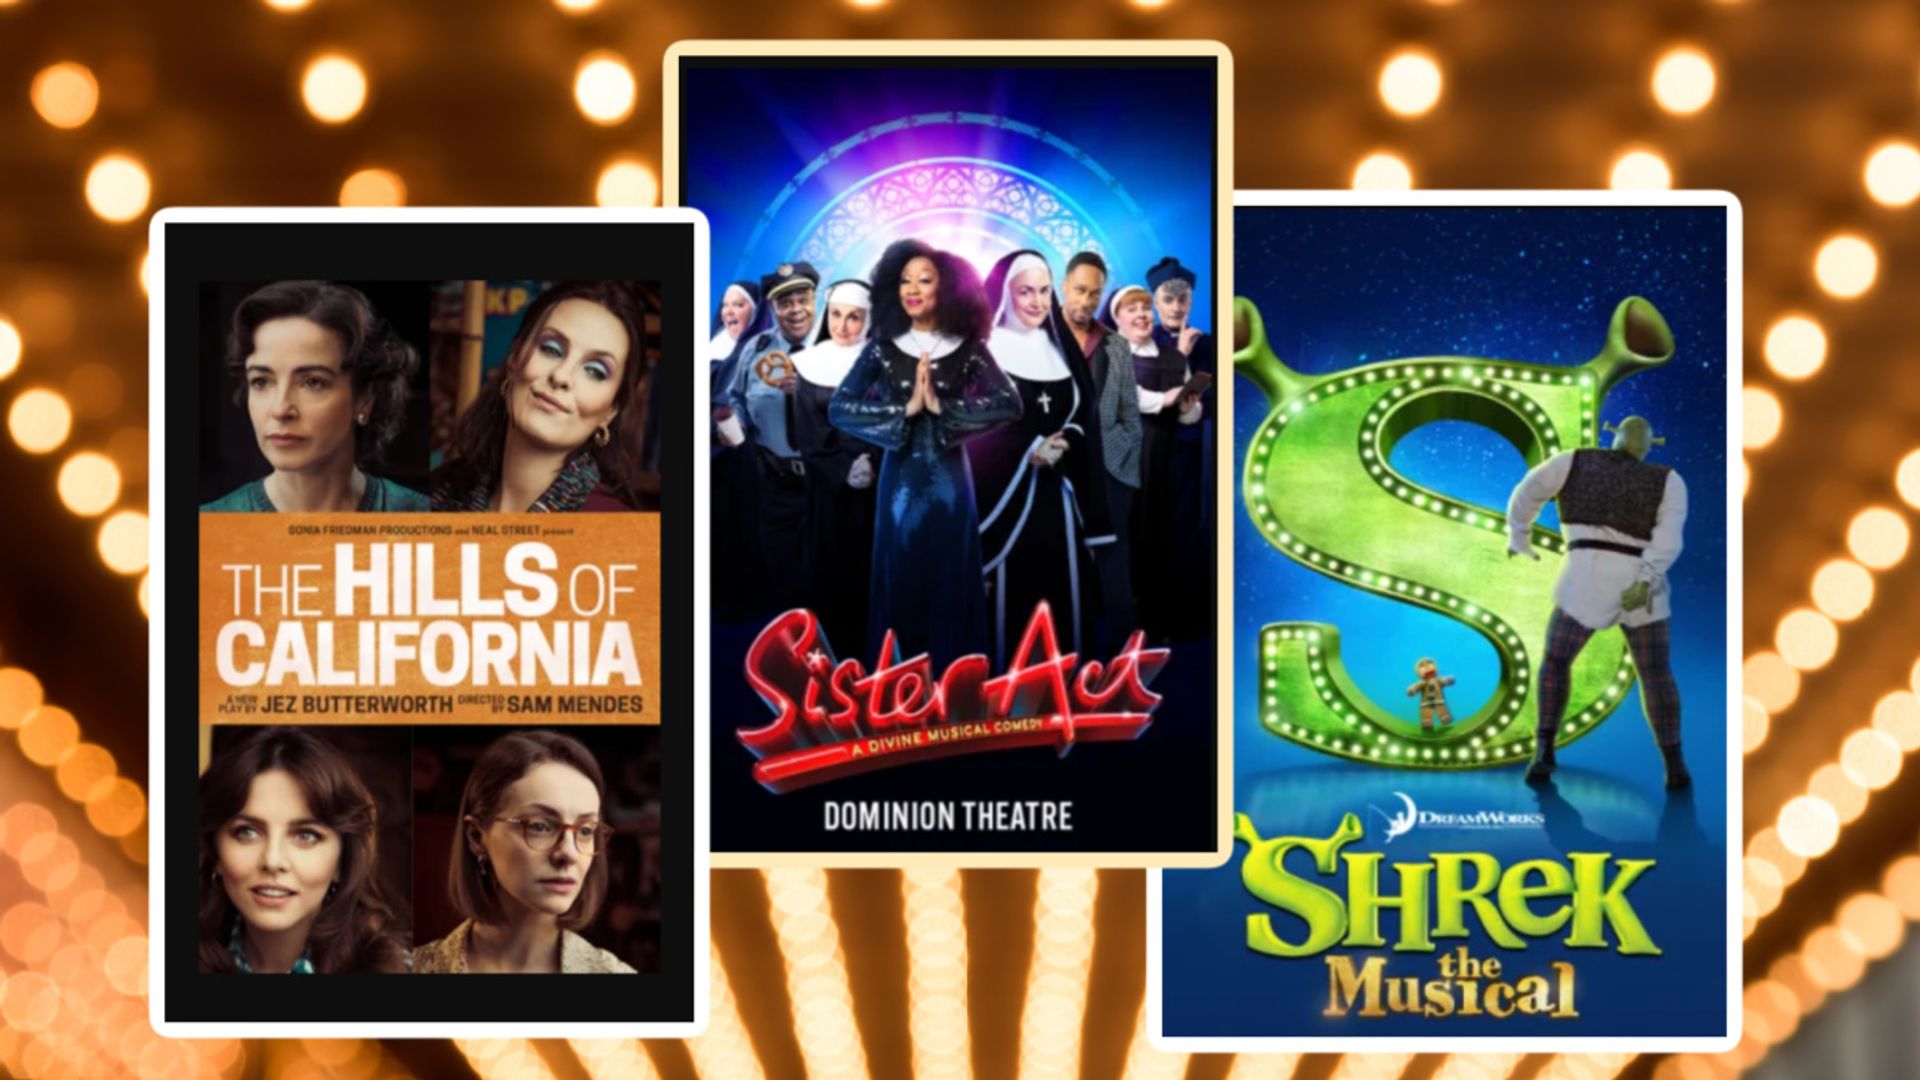 Attn: Theatre lovers - See your favourite West End show from just £25 in the TodayTix Spring Theatre Sale